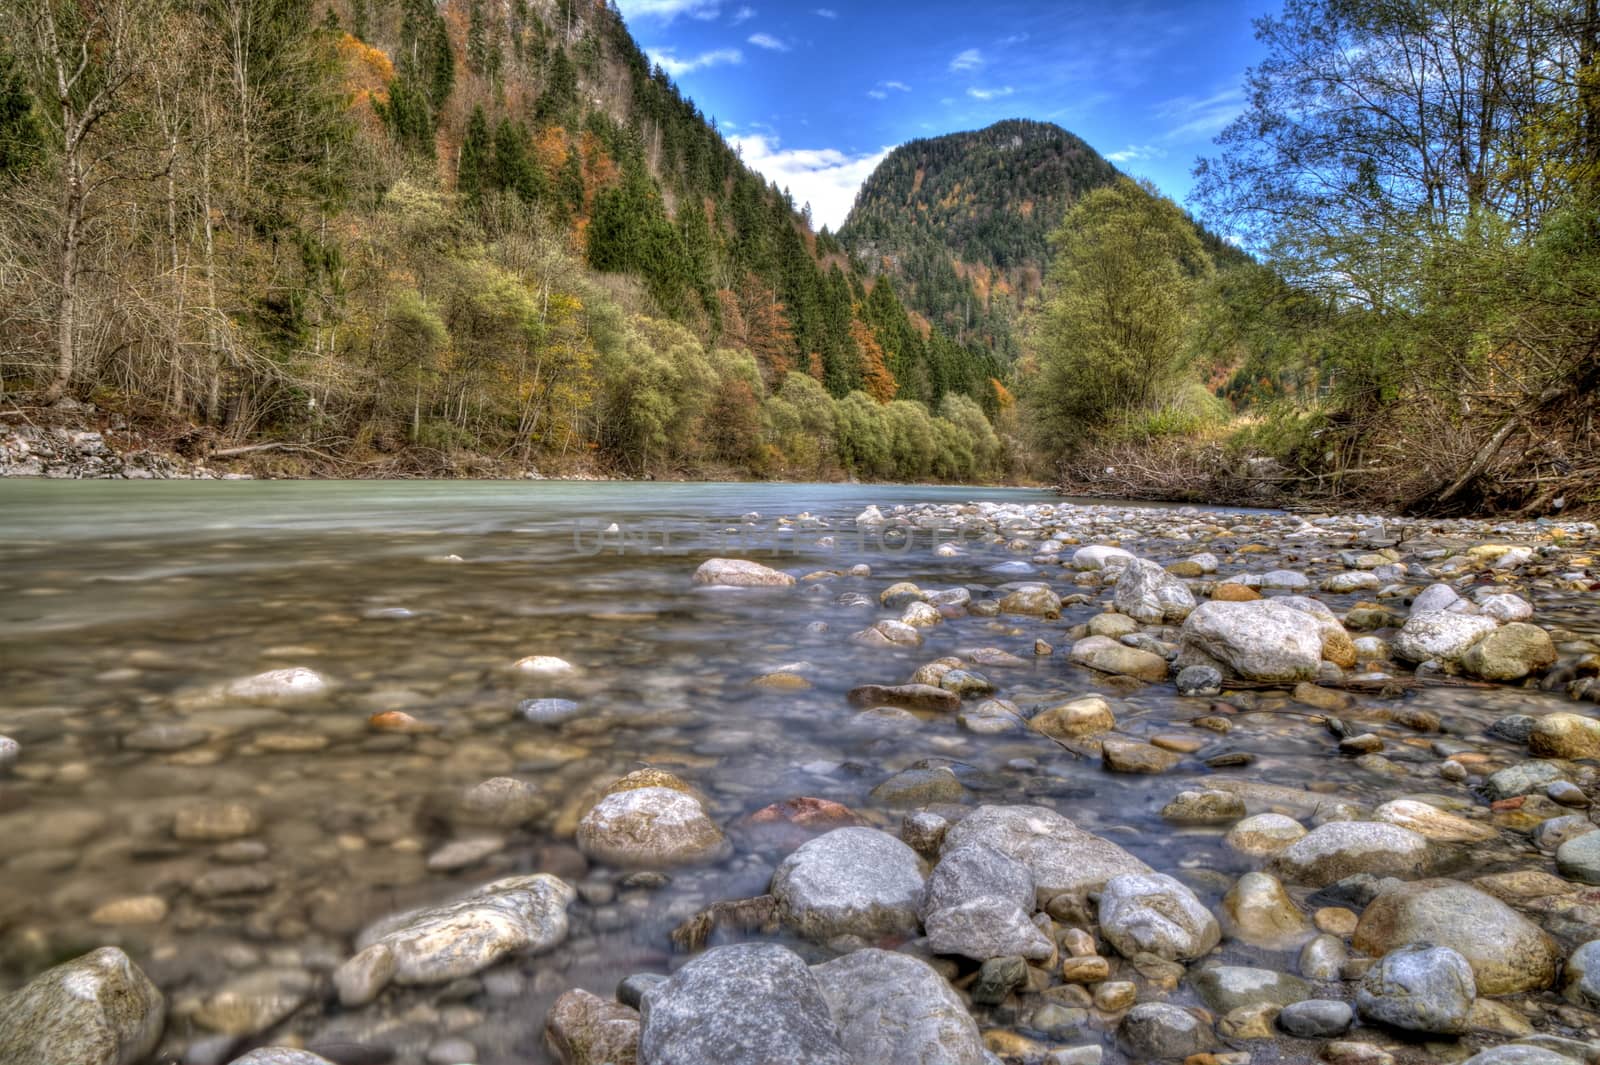 Rocks in the flowing river at the mountains by anderm